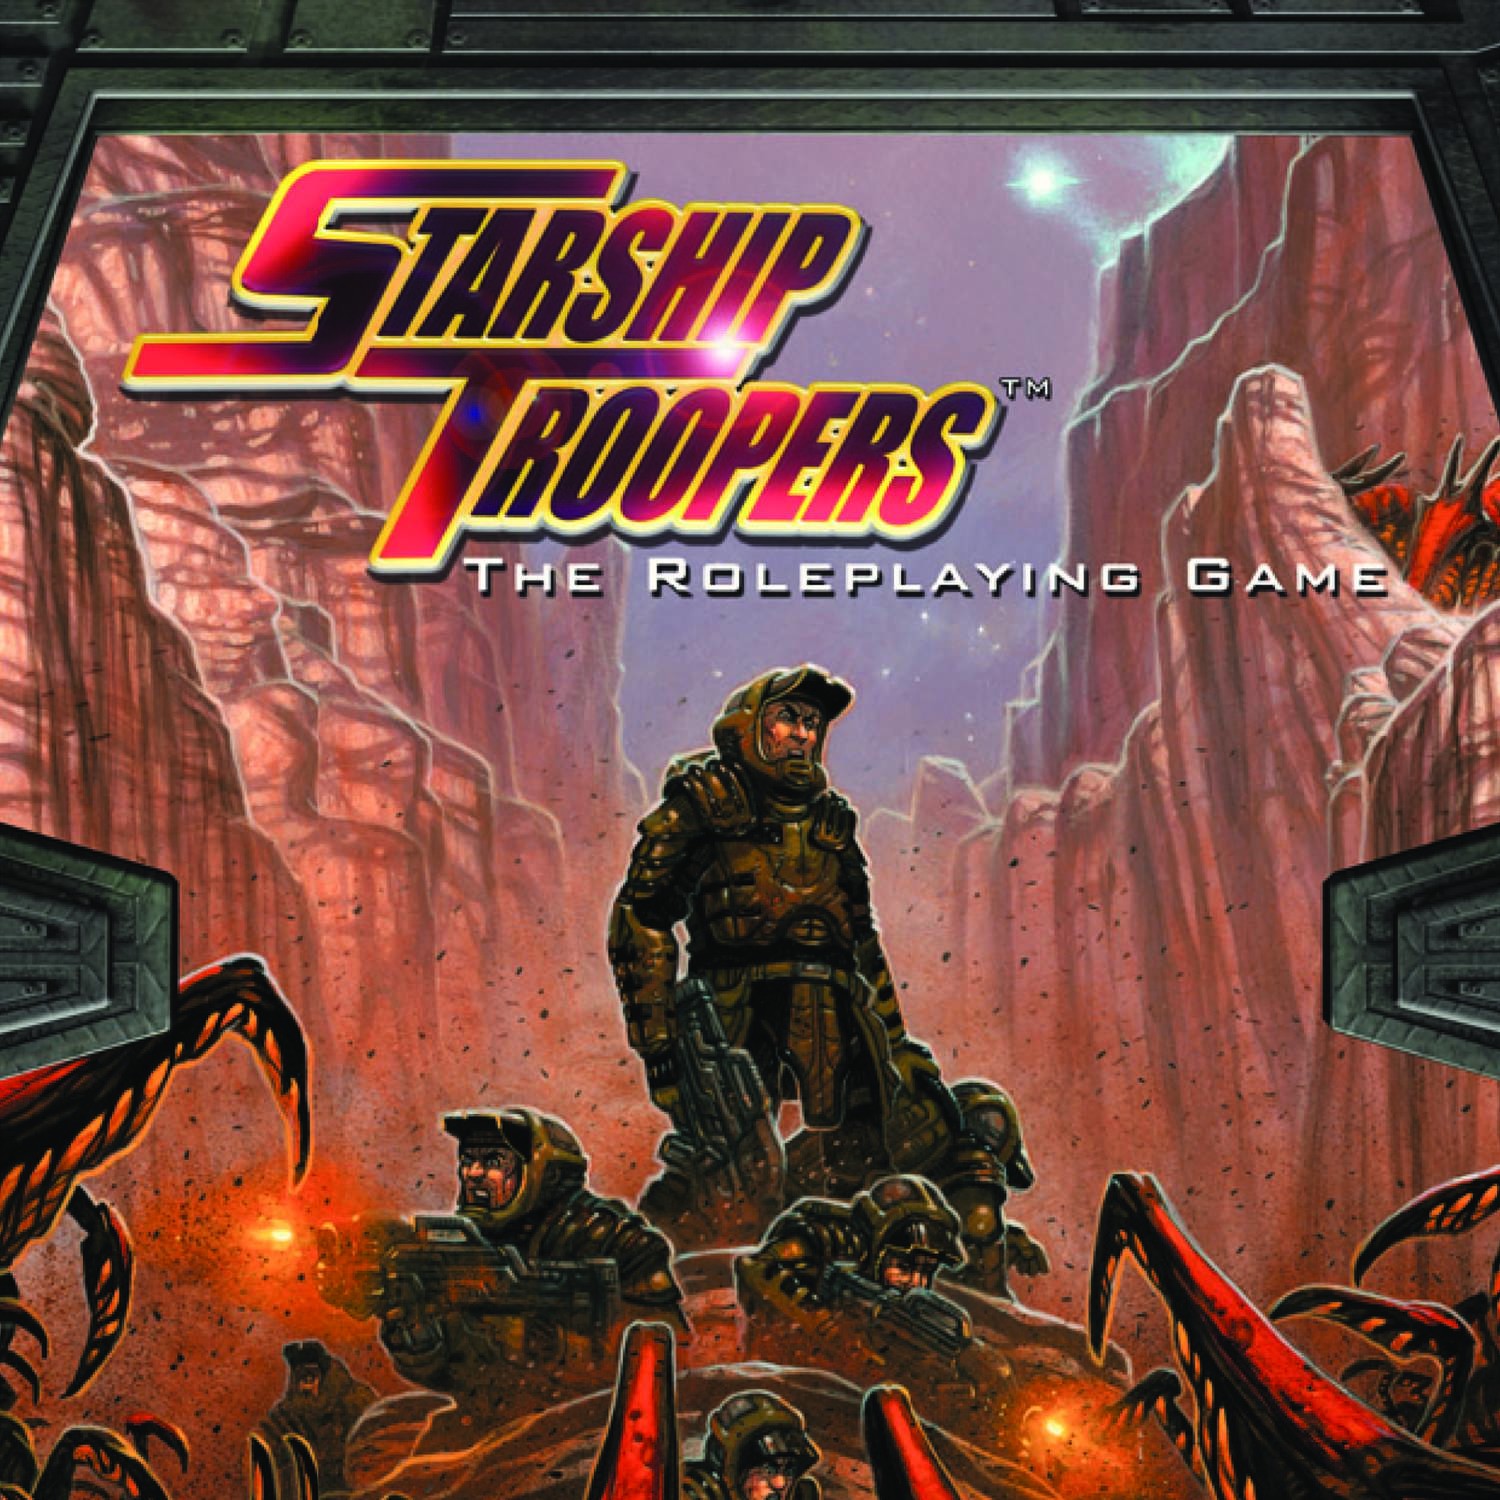 STARSHIP TROOPERS The Roleplaying Game MOBILE INFANTRY FIELD MANUAL D20 HC NEW! 